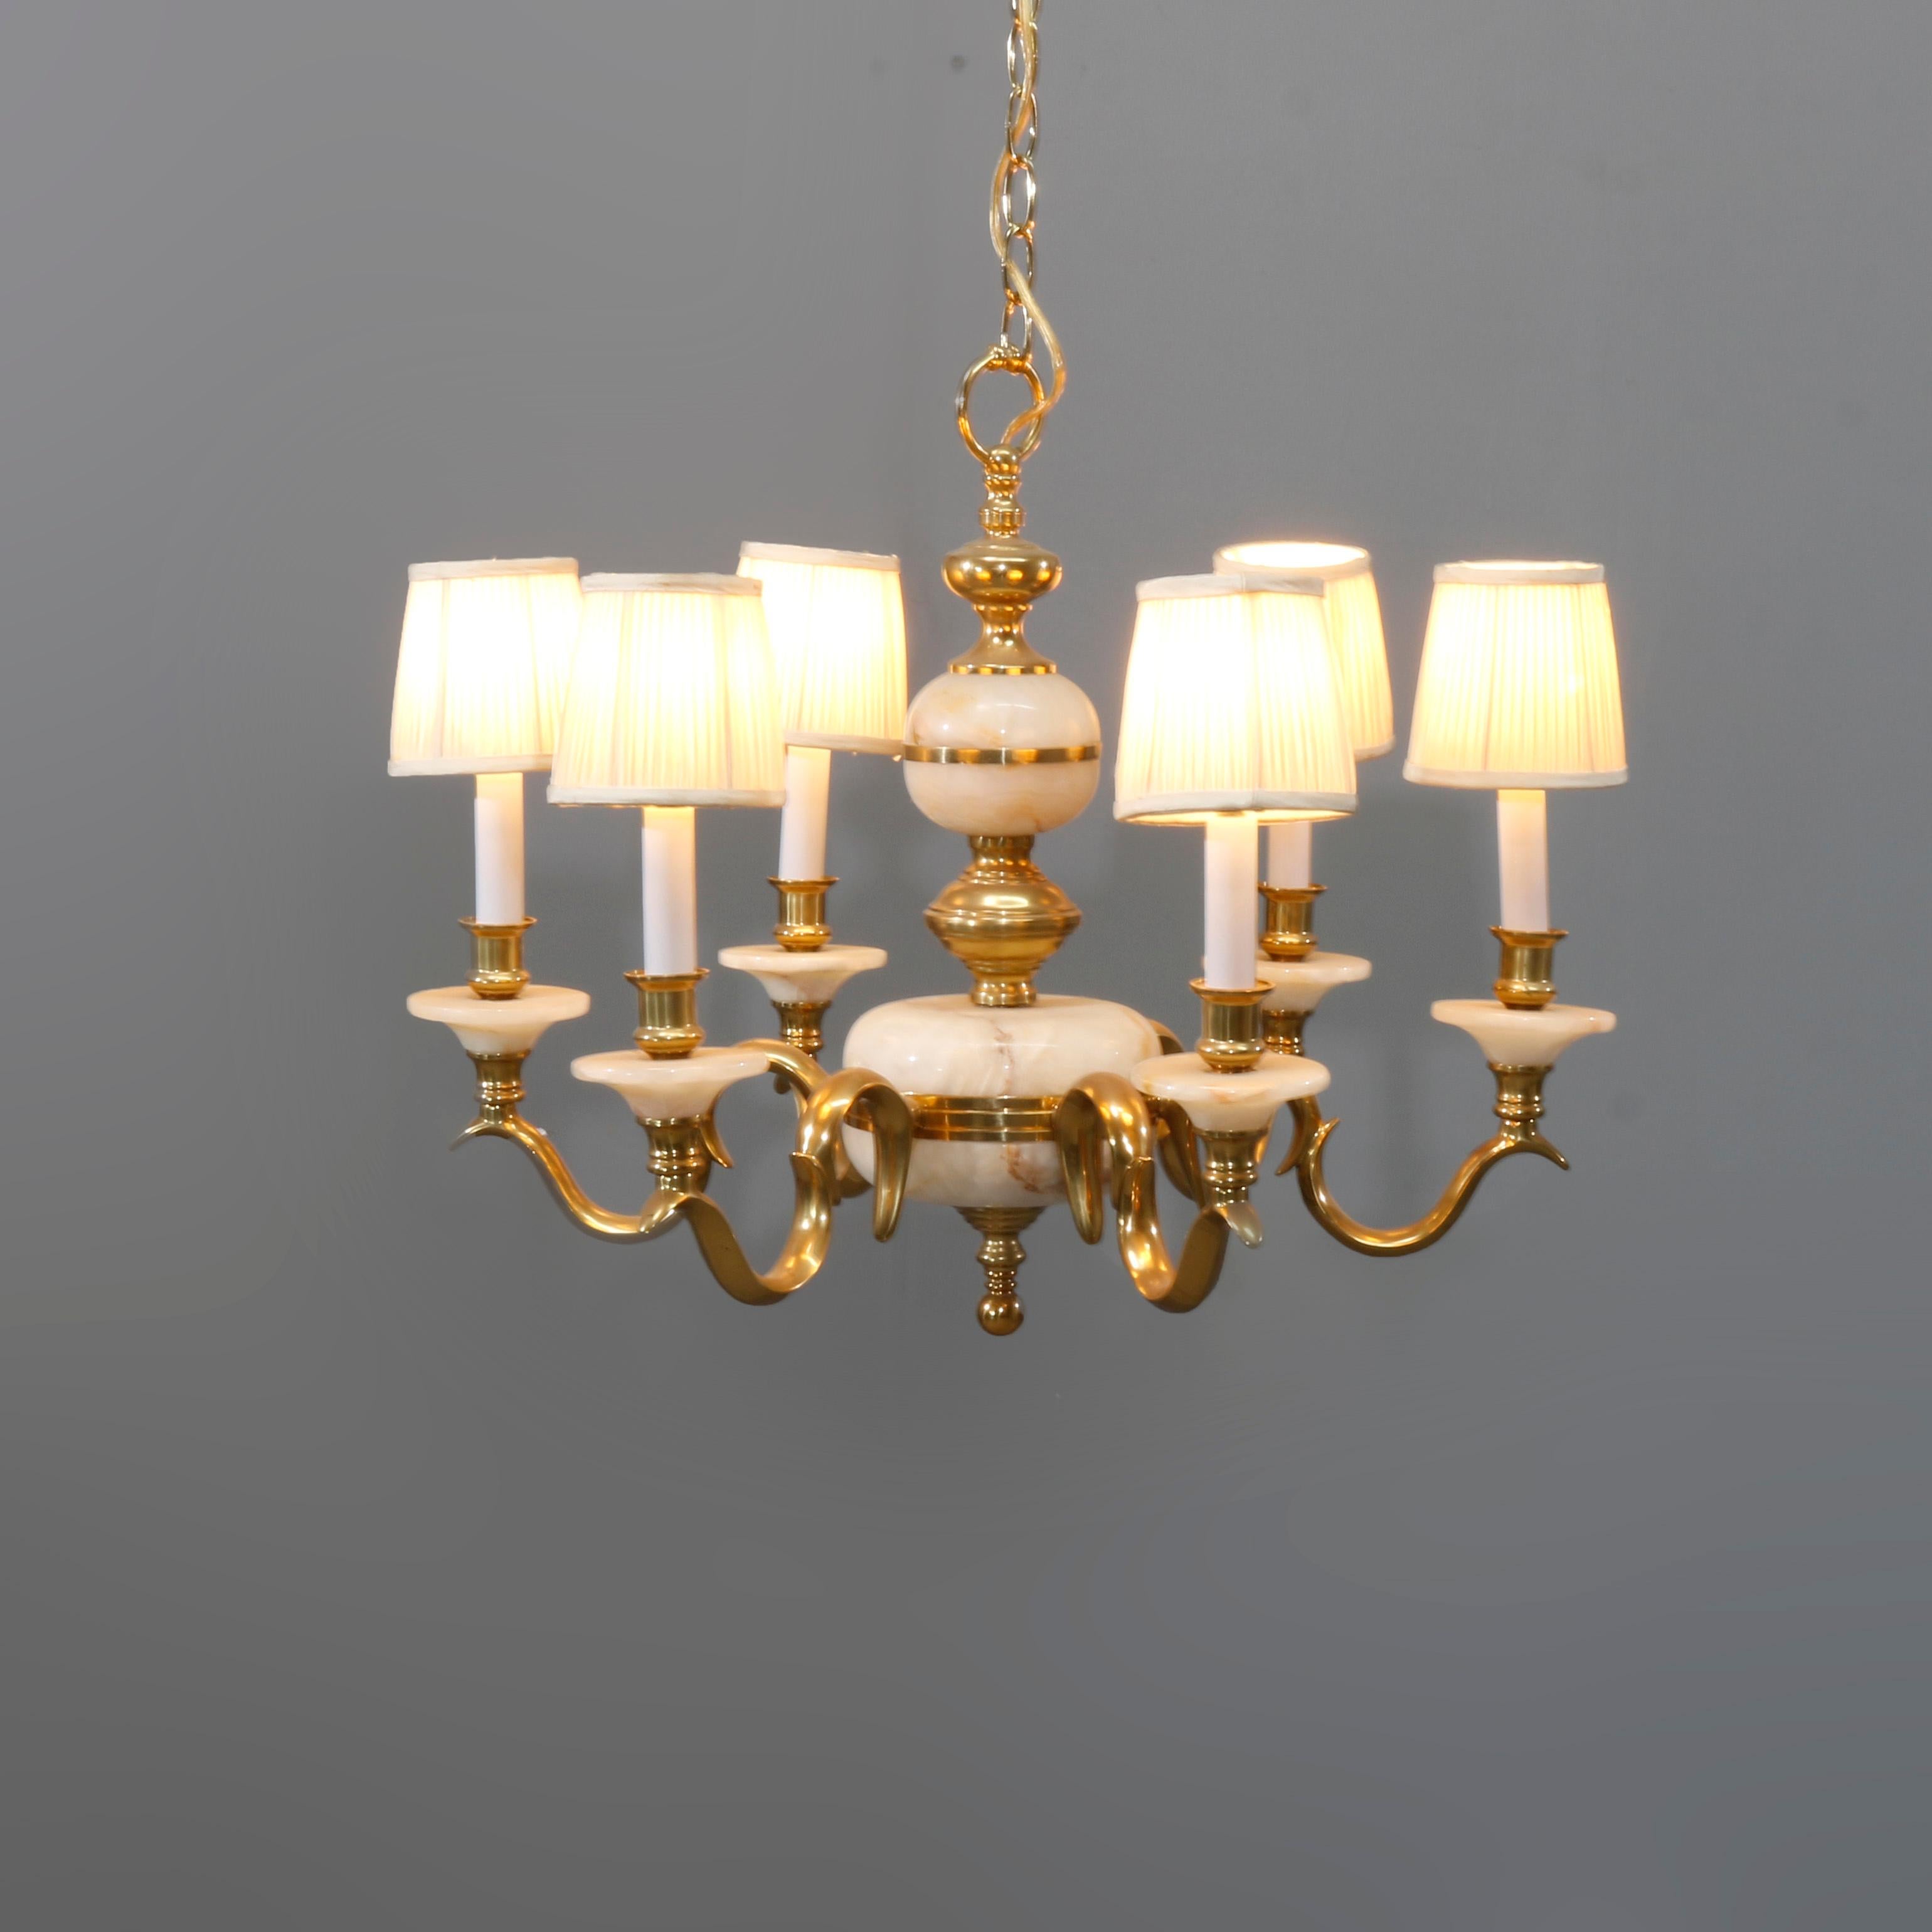 A French chandelier offers brass frame with alabaster column and bobeche elements and scroll form arms terminating in candle lights with shades, 20th Century

Measures: 40.5